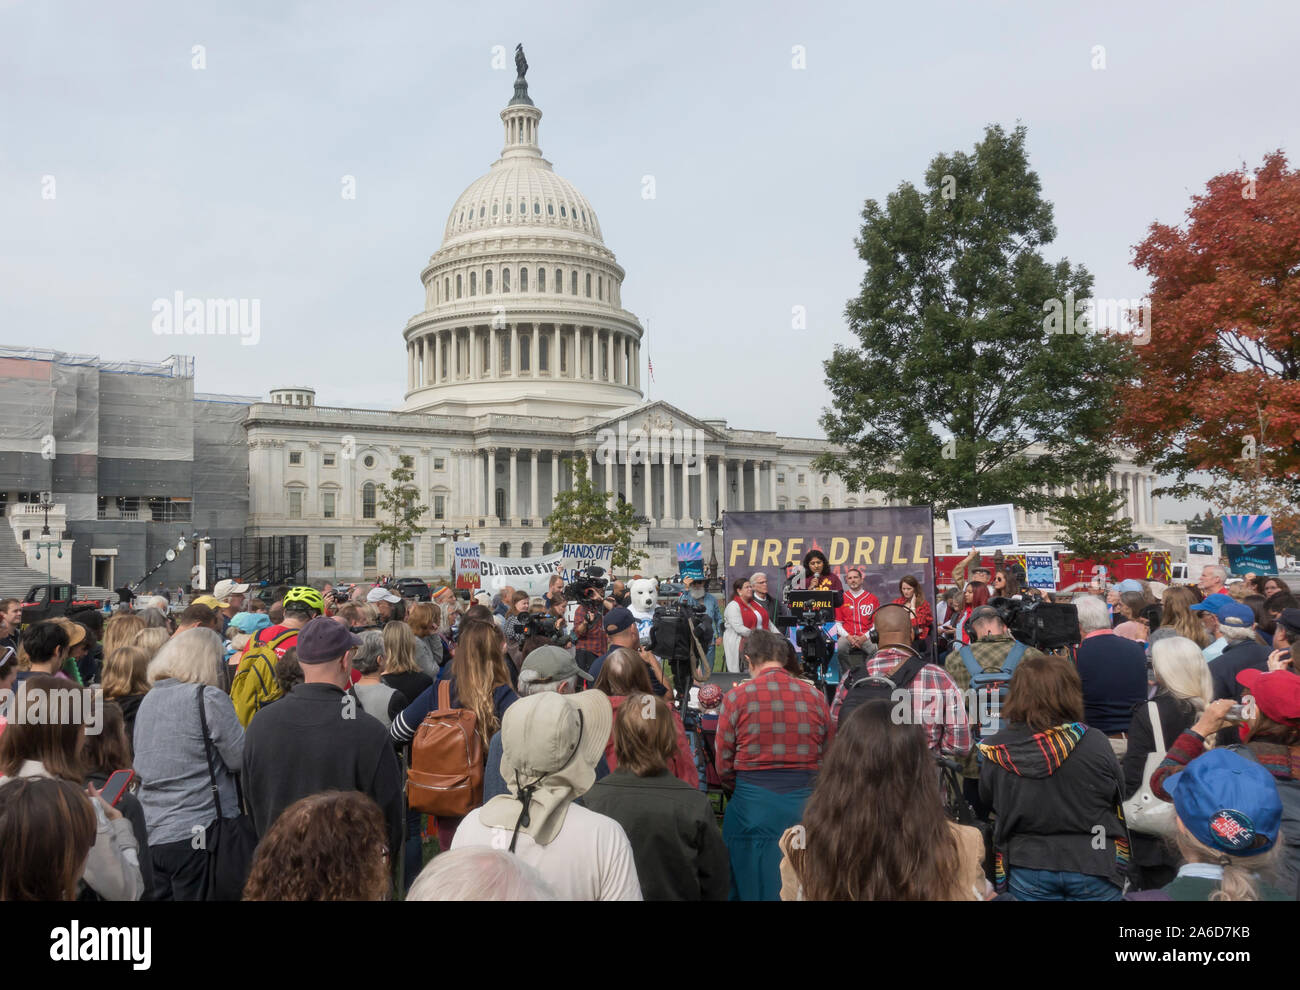 Washington, DC - Oct. 25, 2019: Actress and activist Jane Fonda's ongoing Fire Drill Friday protest at the U.S. Capitol demanding government action on climate change and ending reliance on 'corrupt' fossil fuel industry. Actor Ted Danson joined this third weekly demonstration. Stock Photo